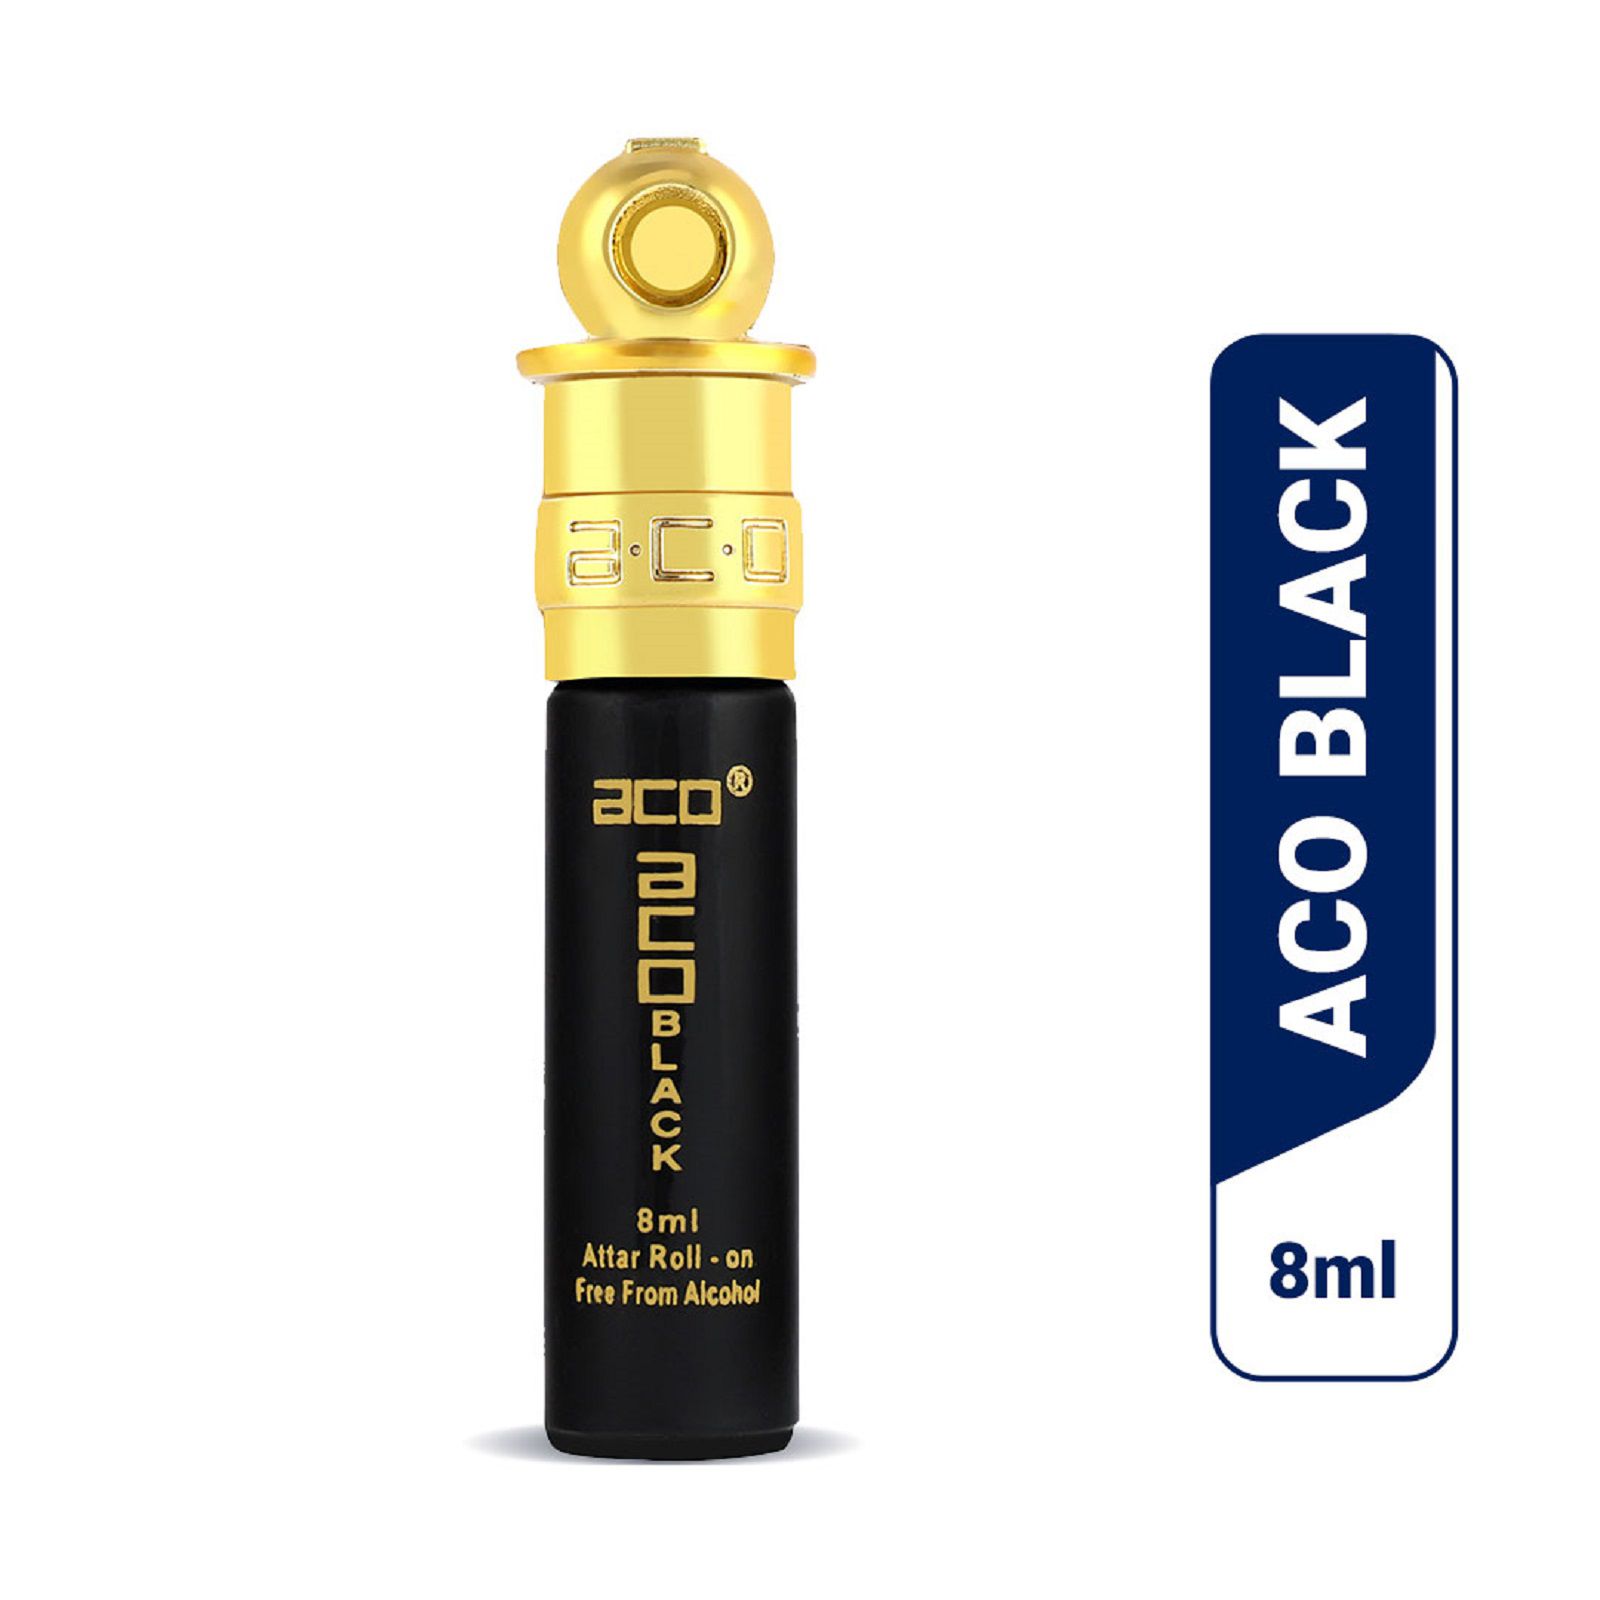     			aco perfumes ACO BLACK   Concentrated  Attar Roll On 8ml